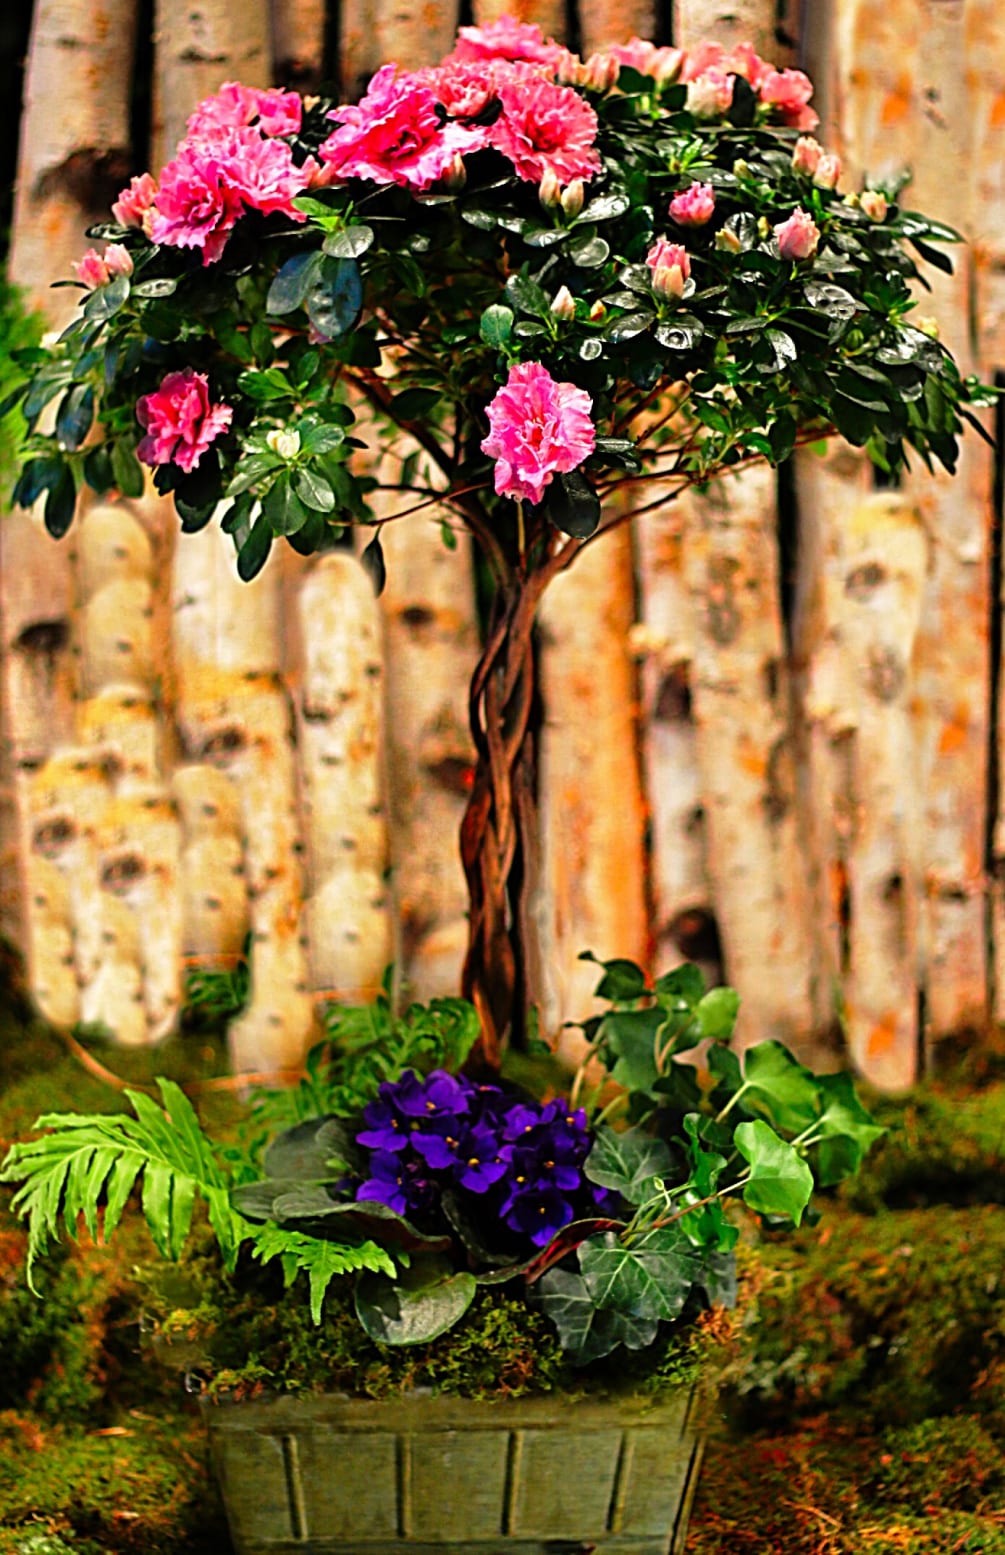 AZALEA PLANT, FERN, IVY, AND AFRICAN VIOLET.